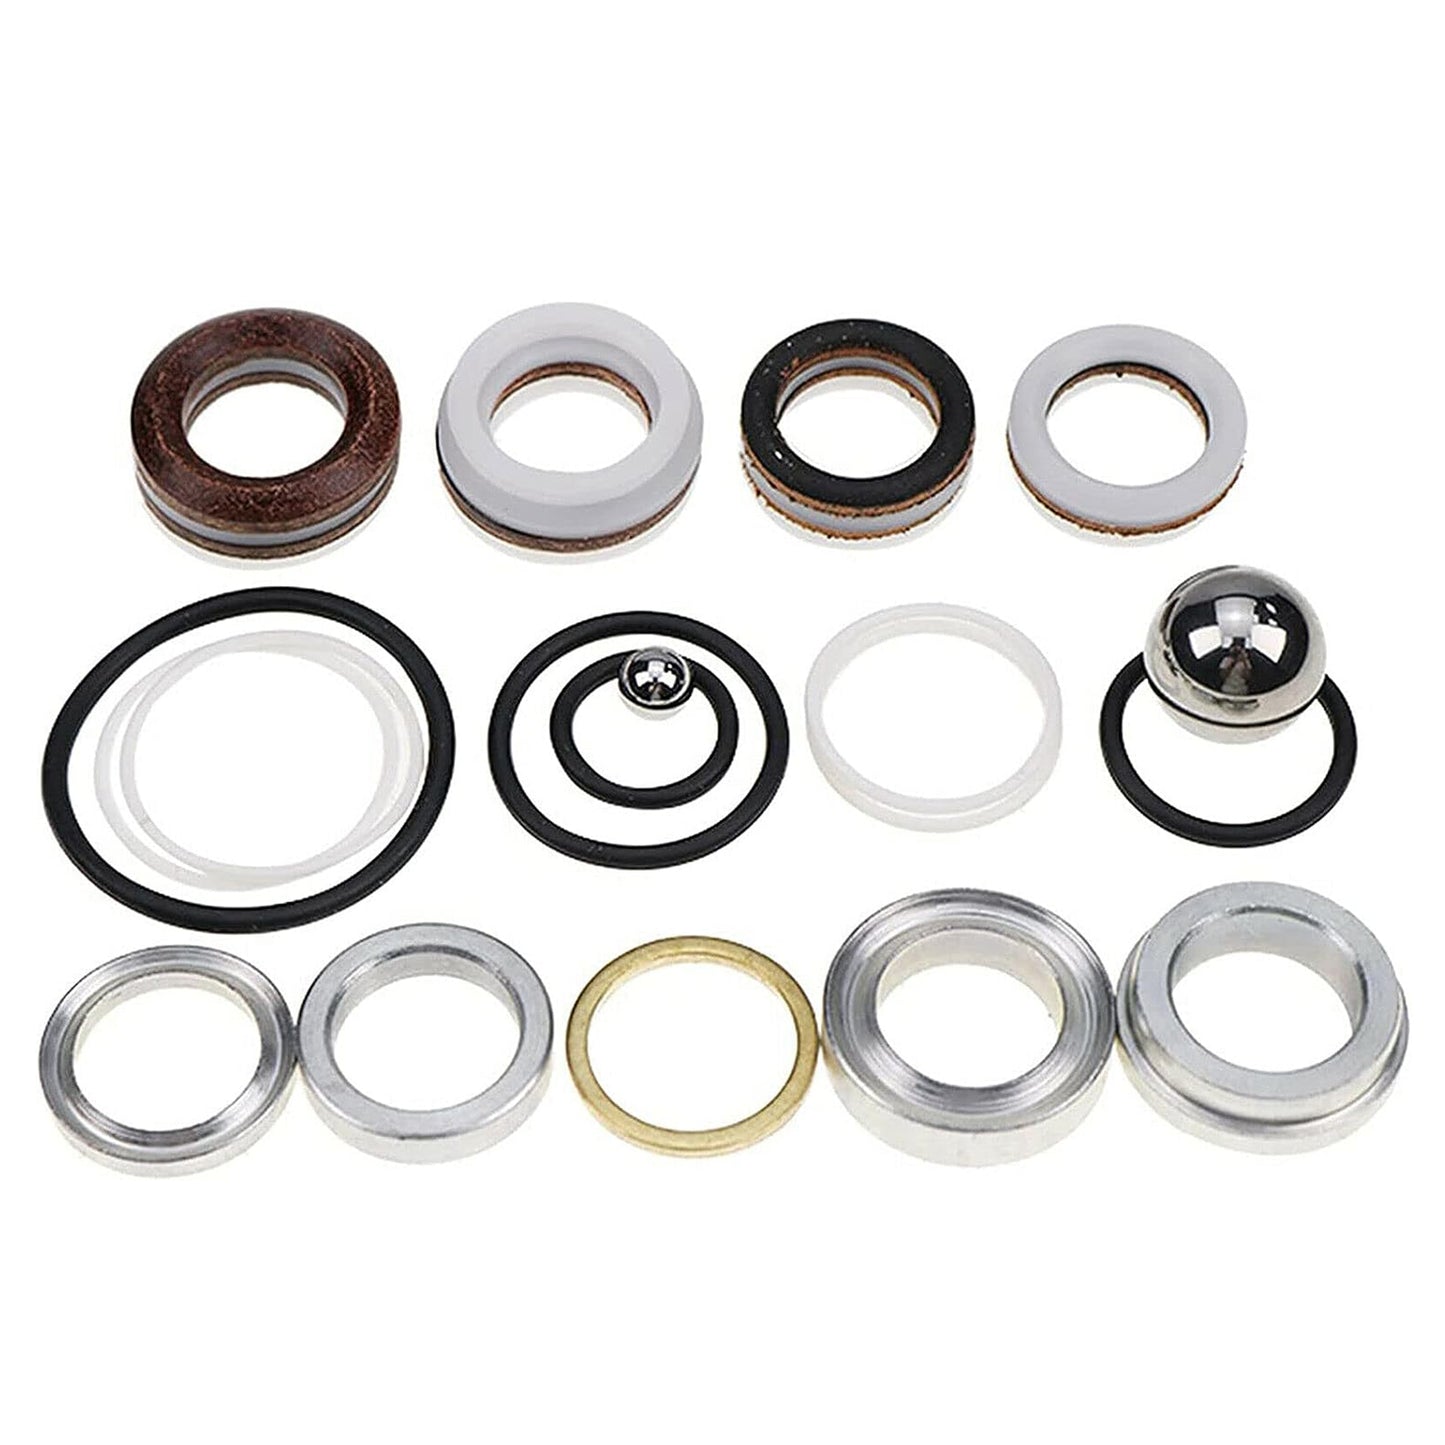 248213 244198 Pump Repair Packing Kit Compatible With Airless Paint Sprayer 1095 1595 5900